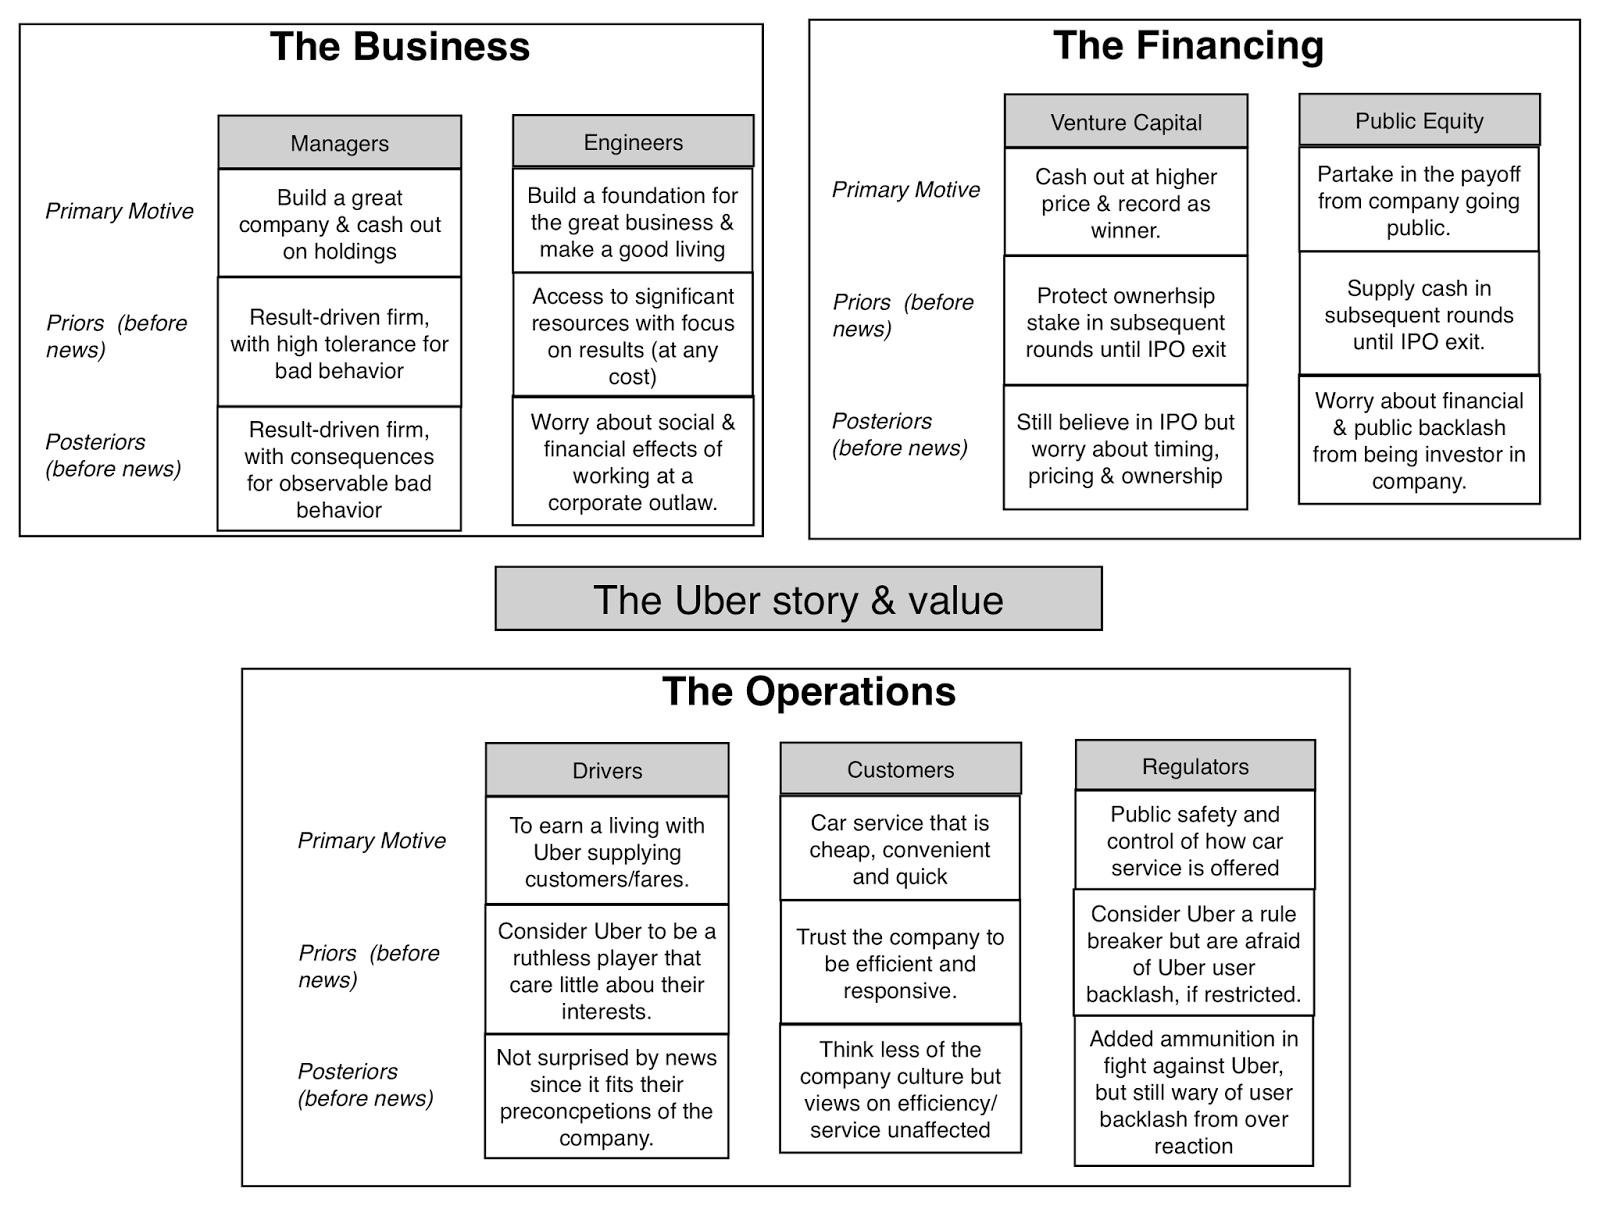 The Uber Story & Value